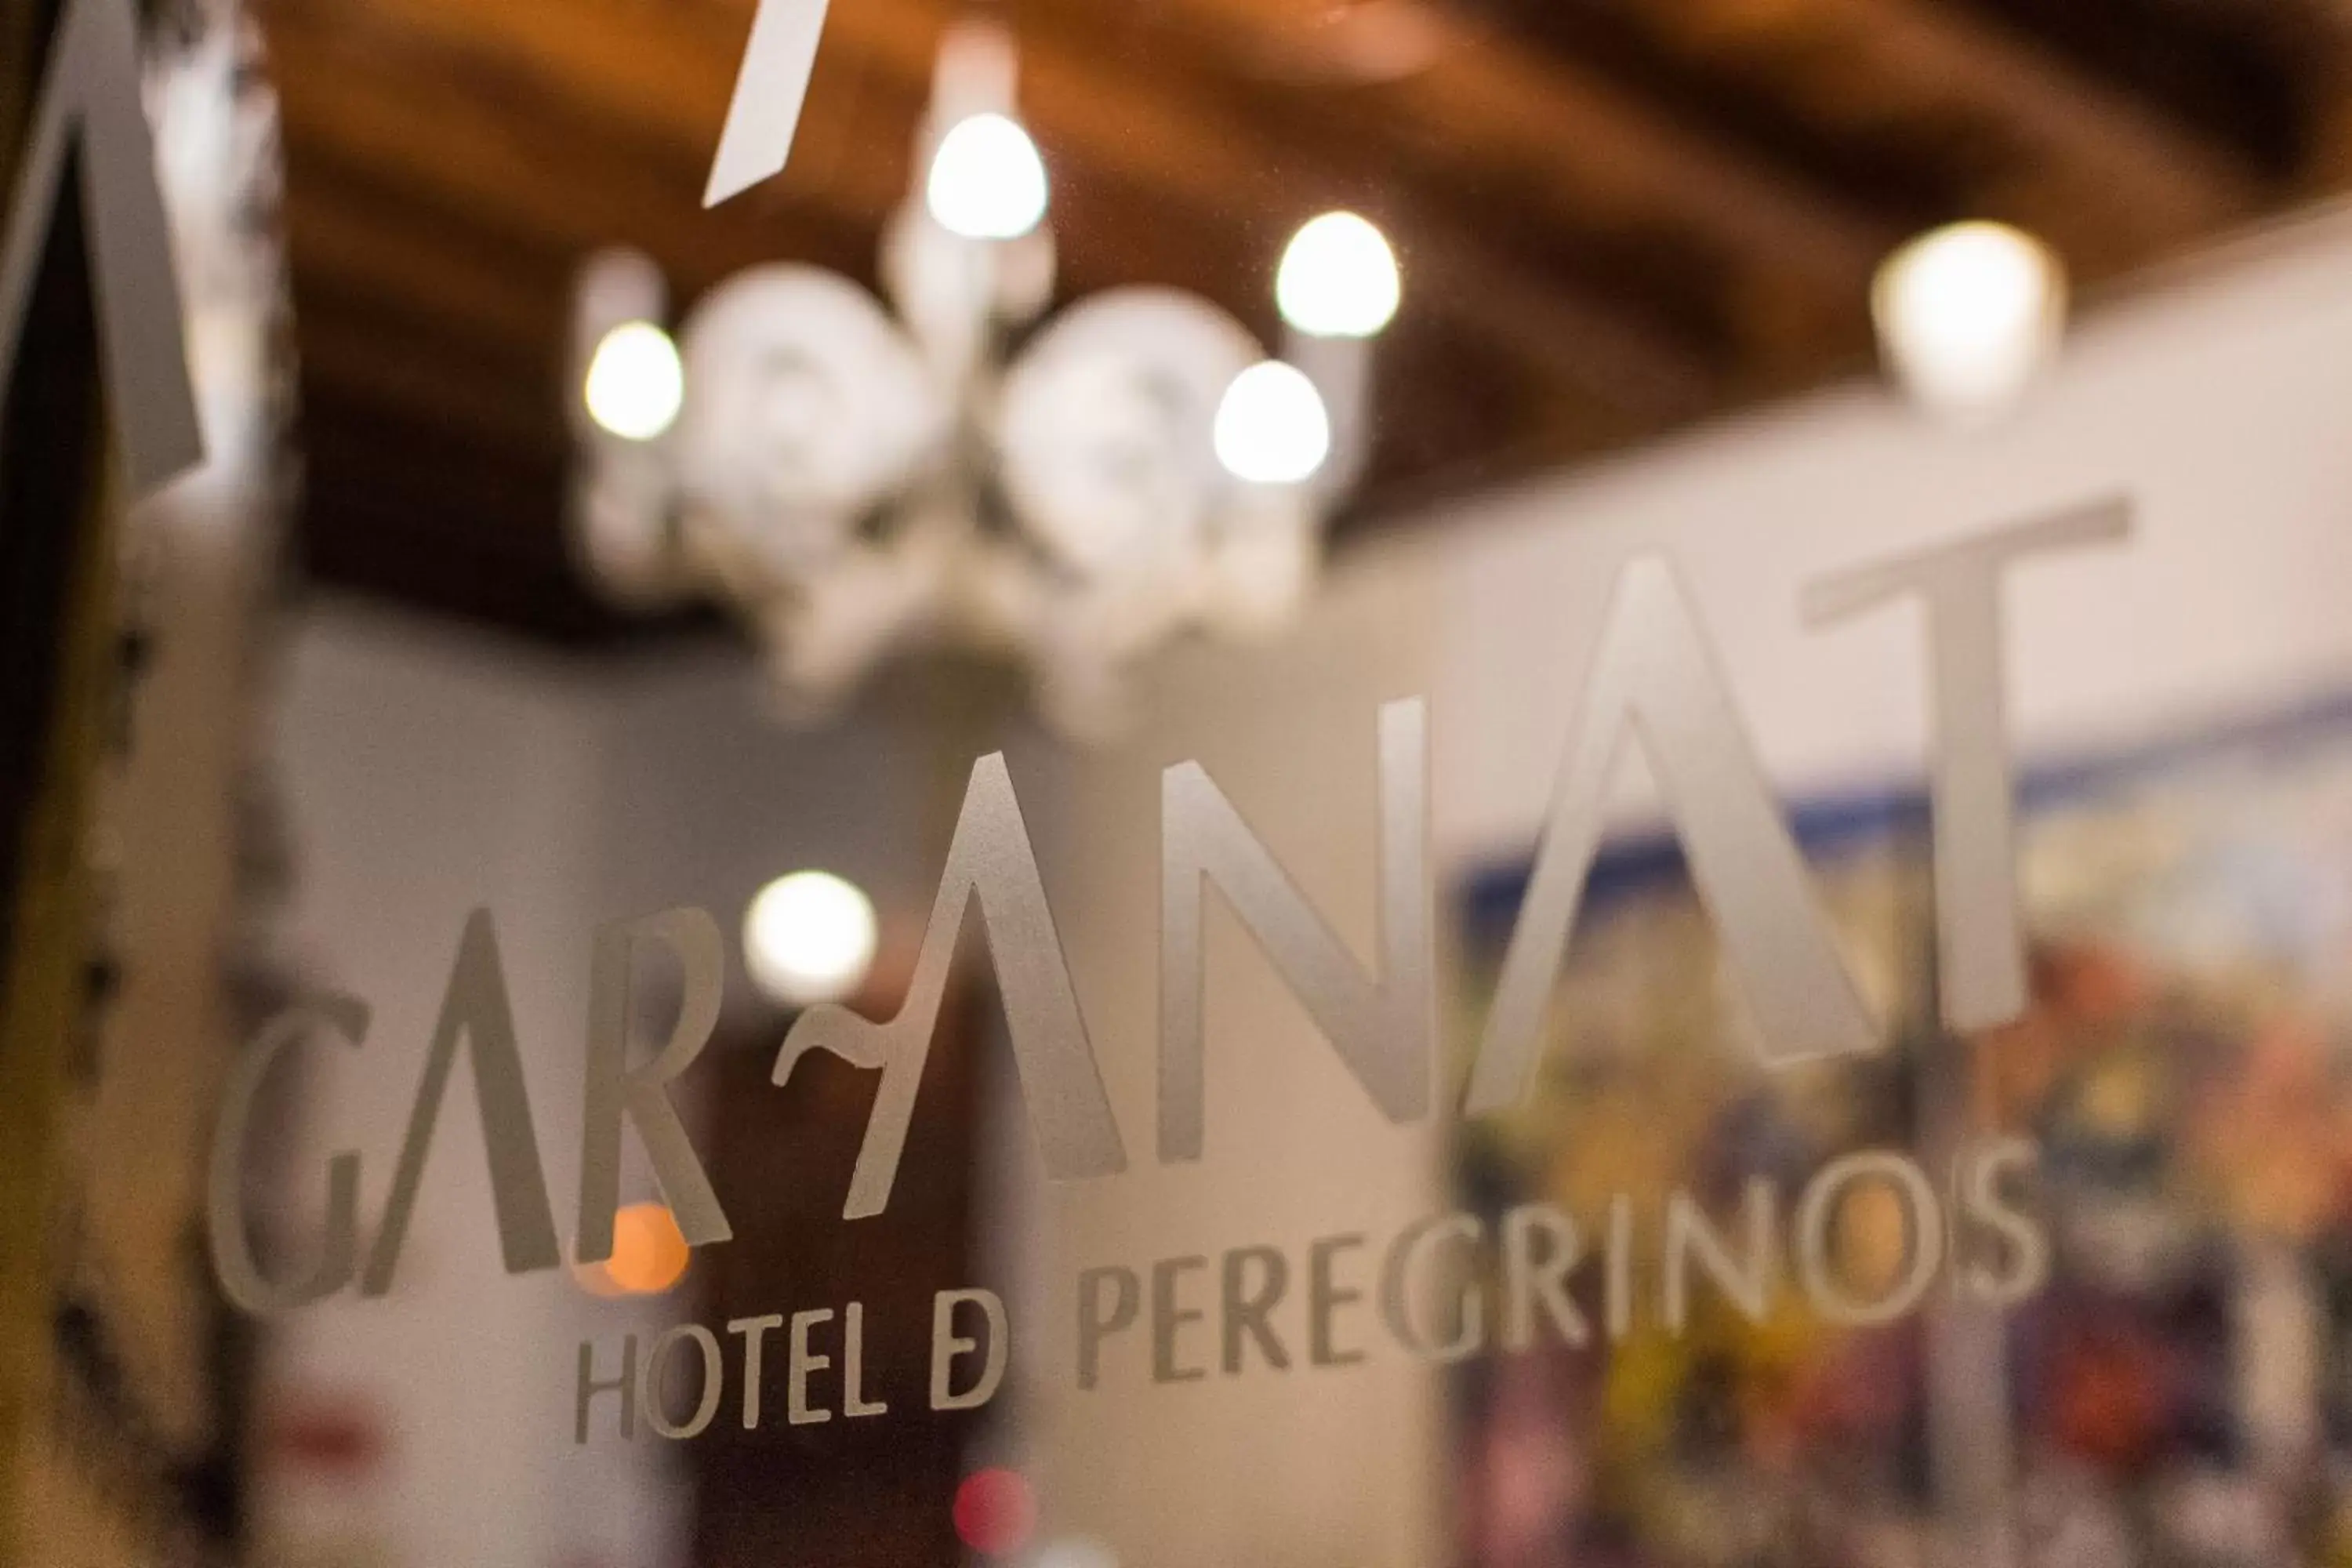 Property logo or sign in Gar Anat Hotel Boutique